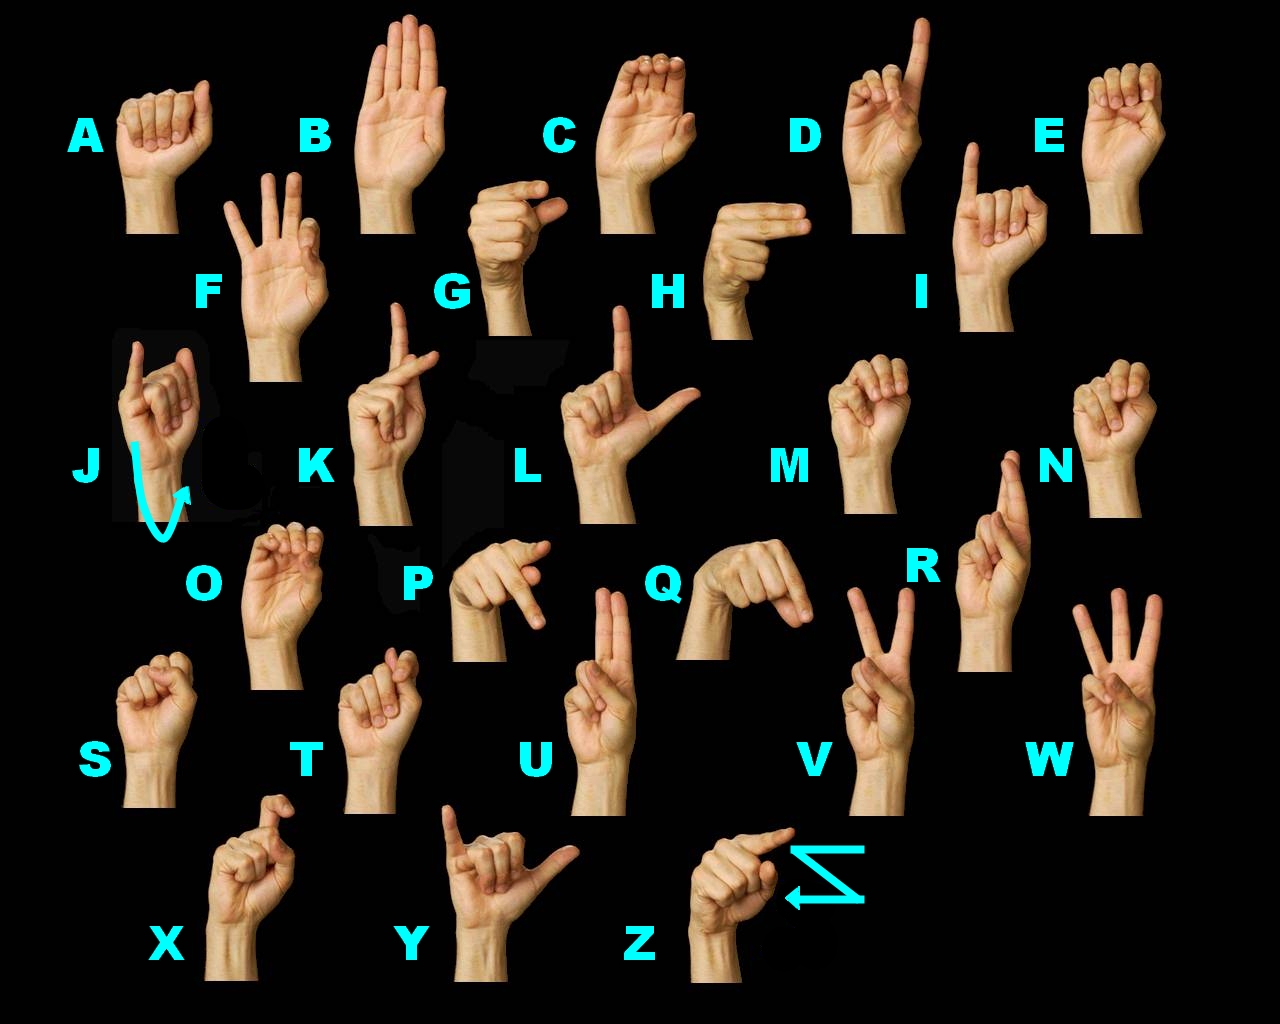 ASL incorporates finger spelling and signing that is as unique as each pers...